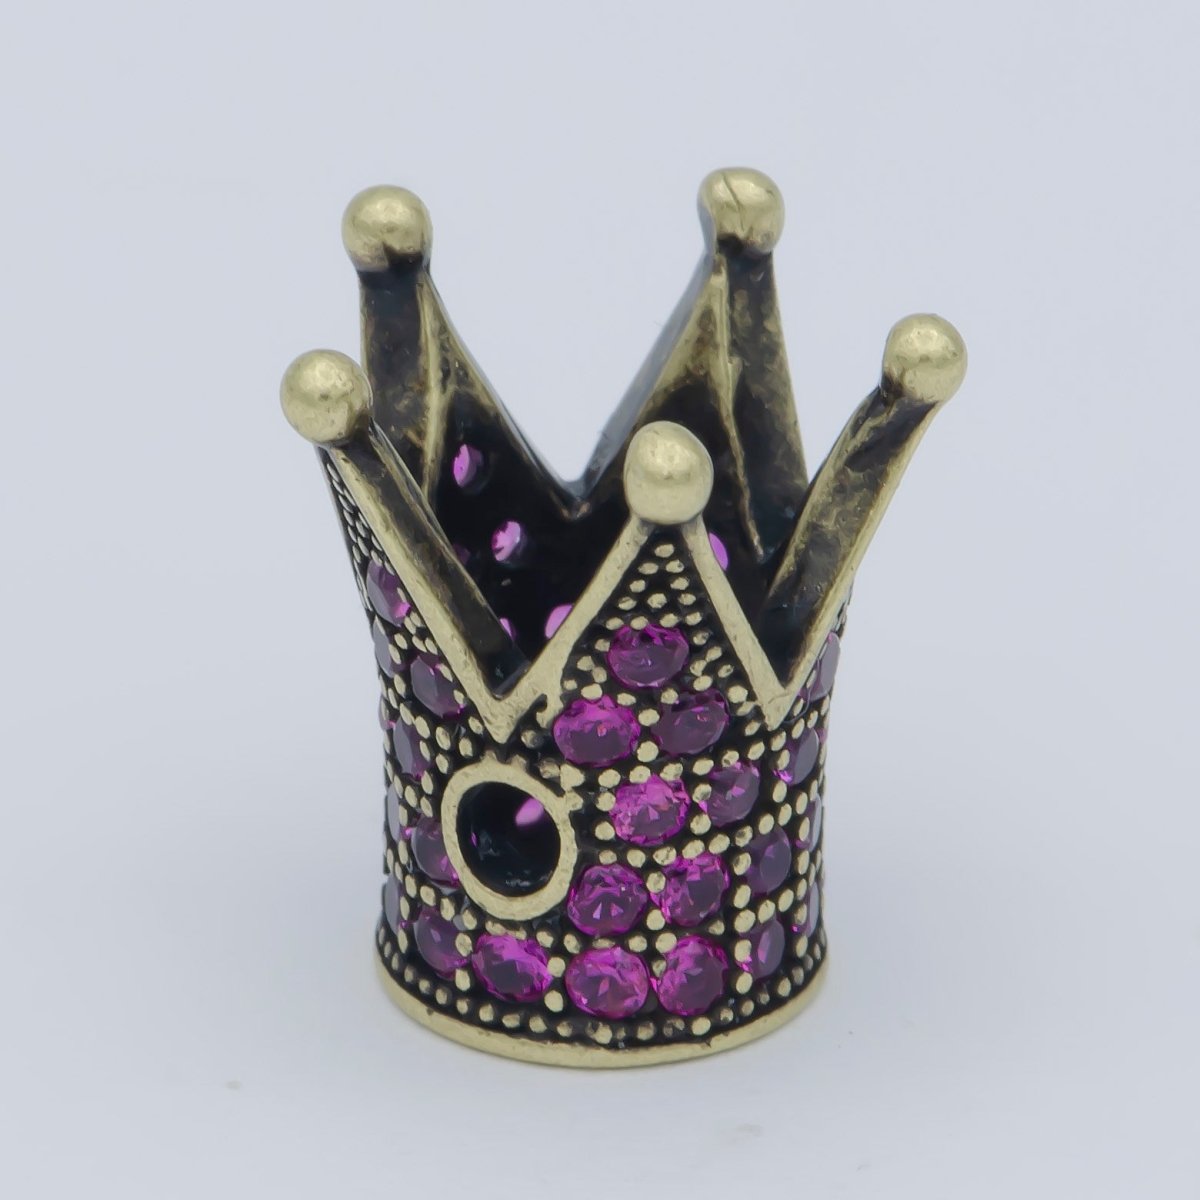 Mini Tiny Emperor Crown Beads CZ Pink Crystal Small Simple King Queen Crown Model Jewelry Making Beads B-577, B-578 - DLUXCA